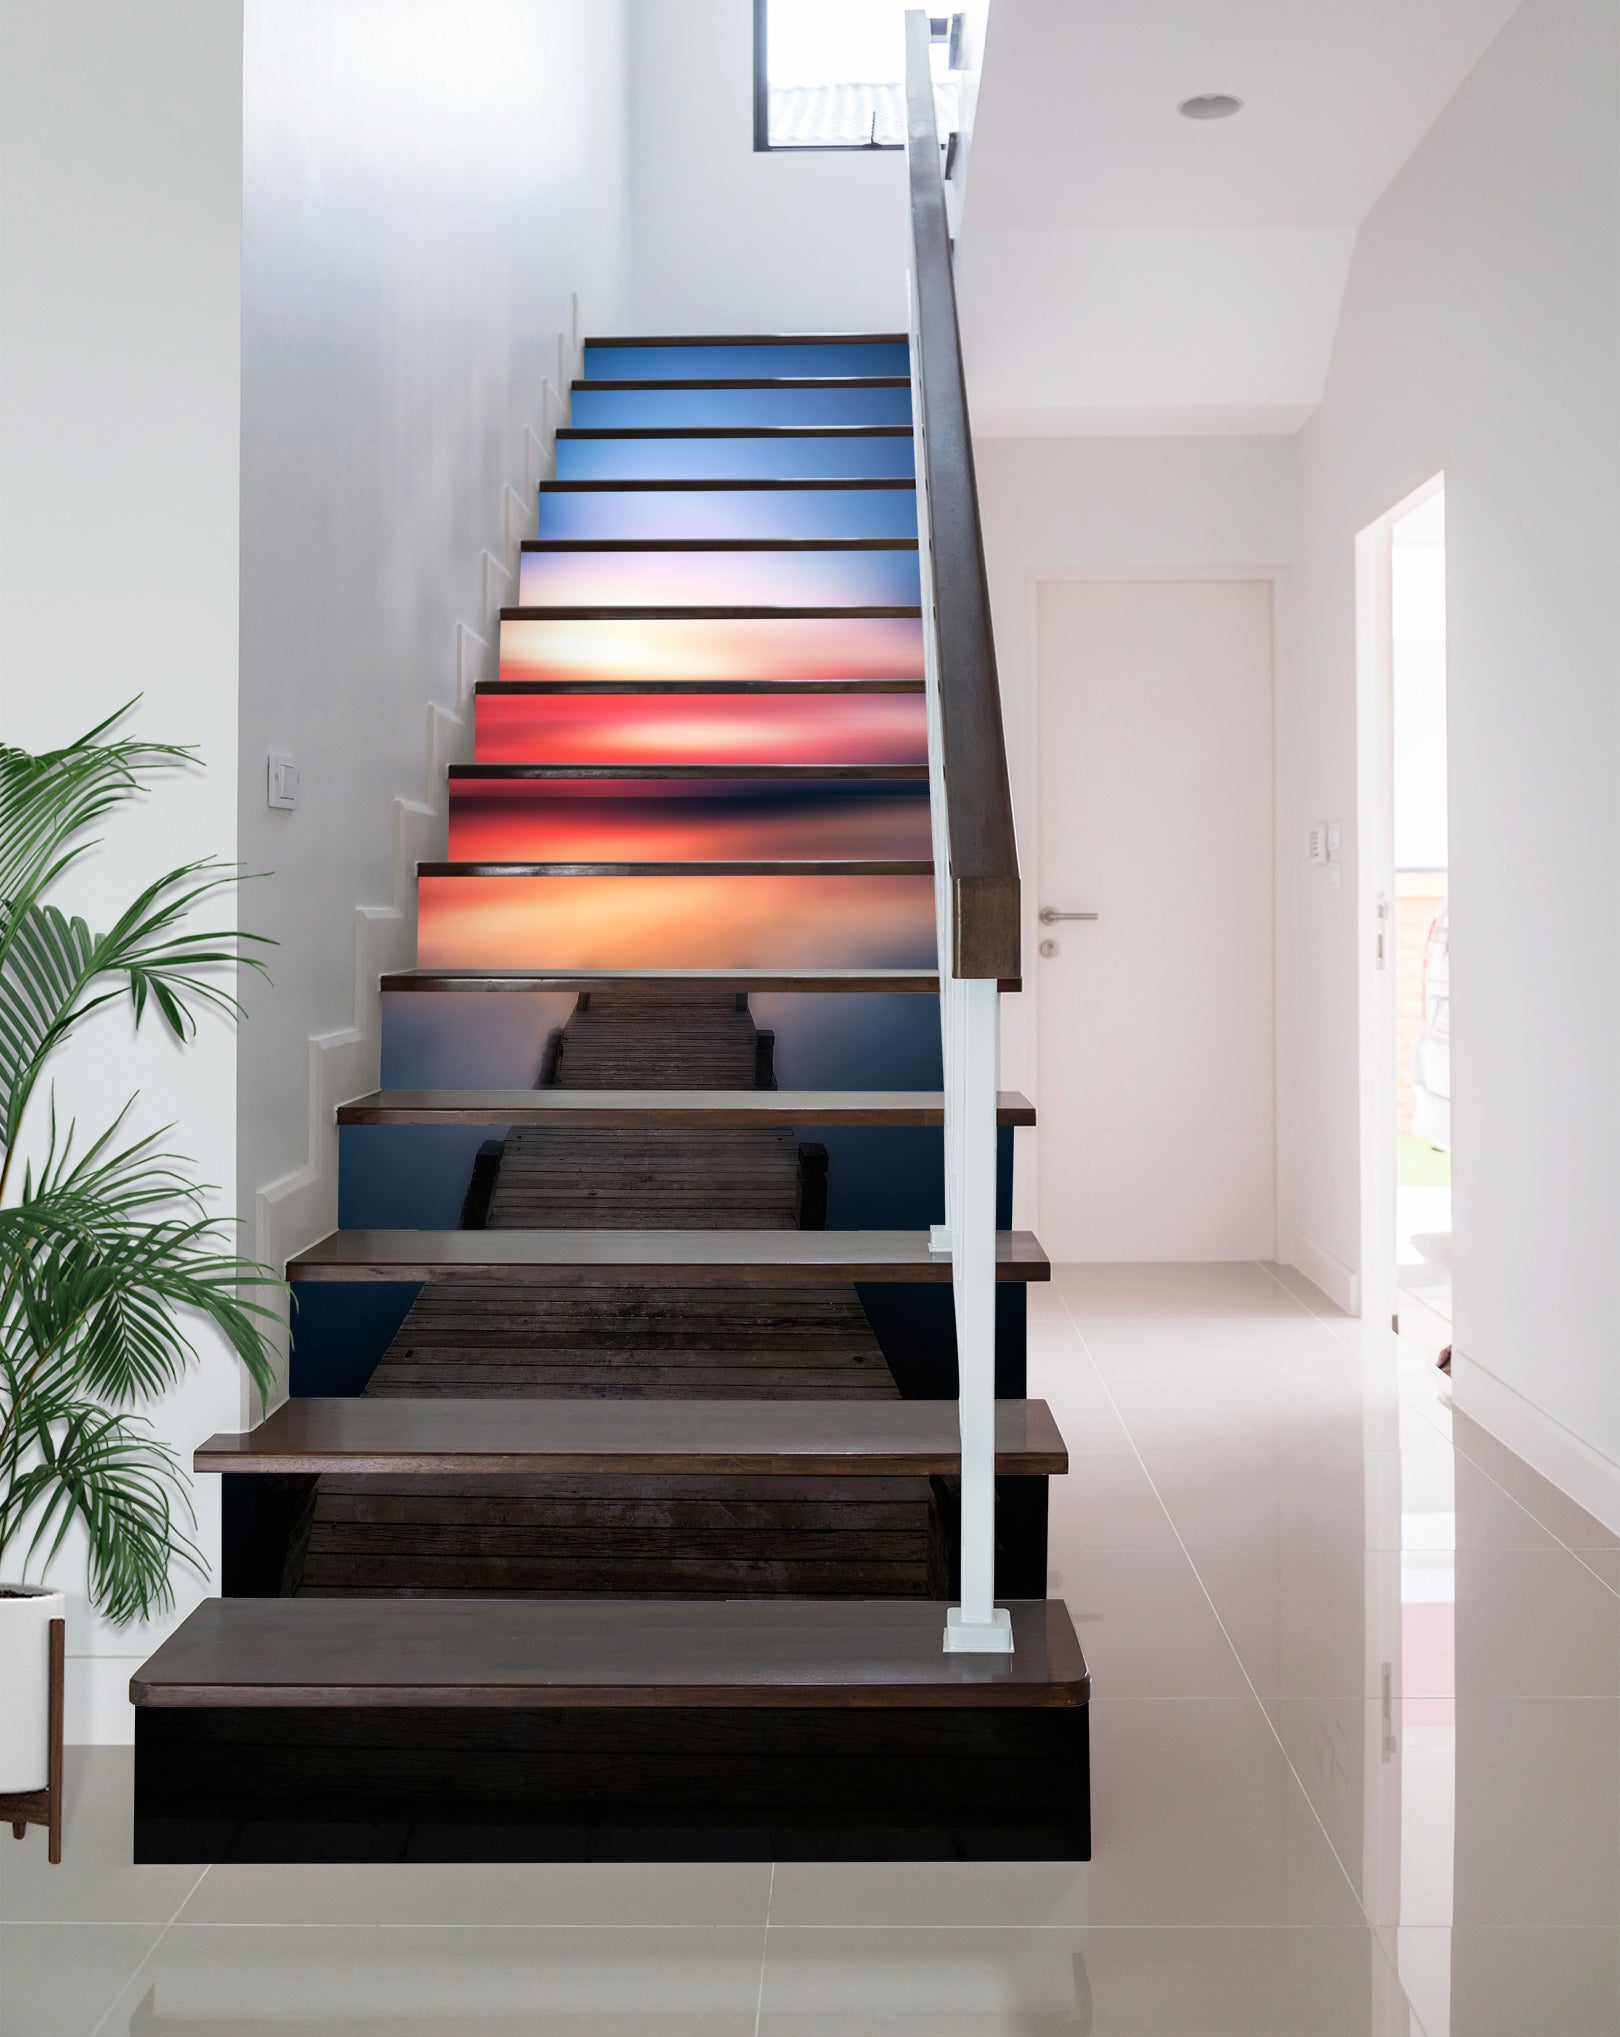 3D Colored Sky 206 Stair Risers